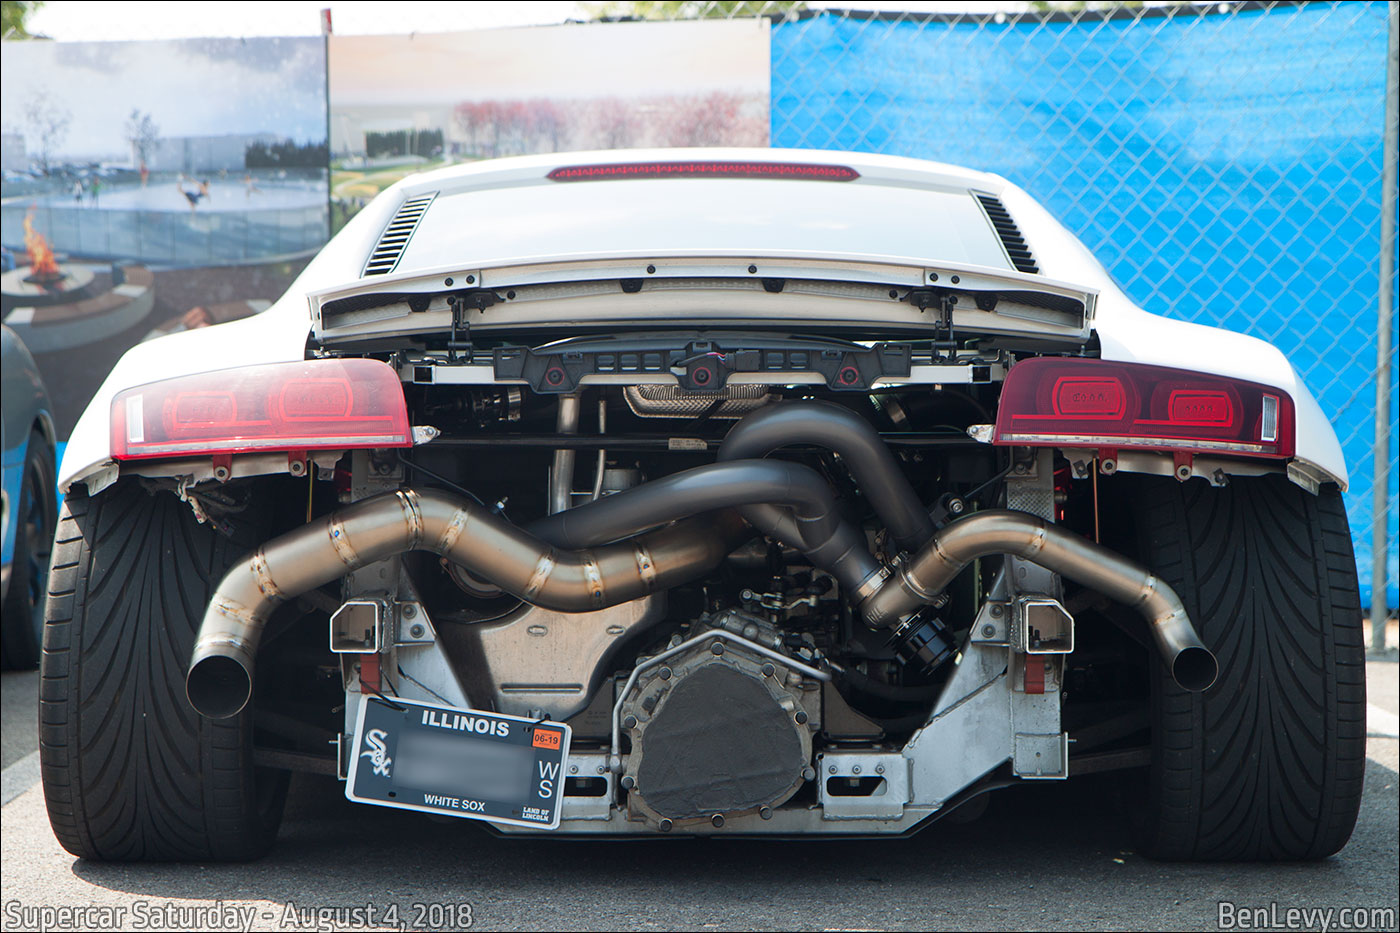 Turbo Audi R8 with bumper off